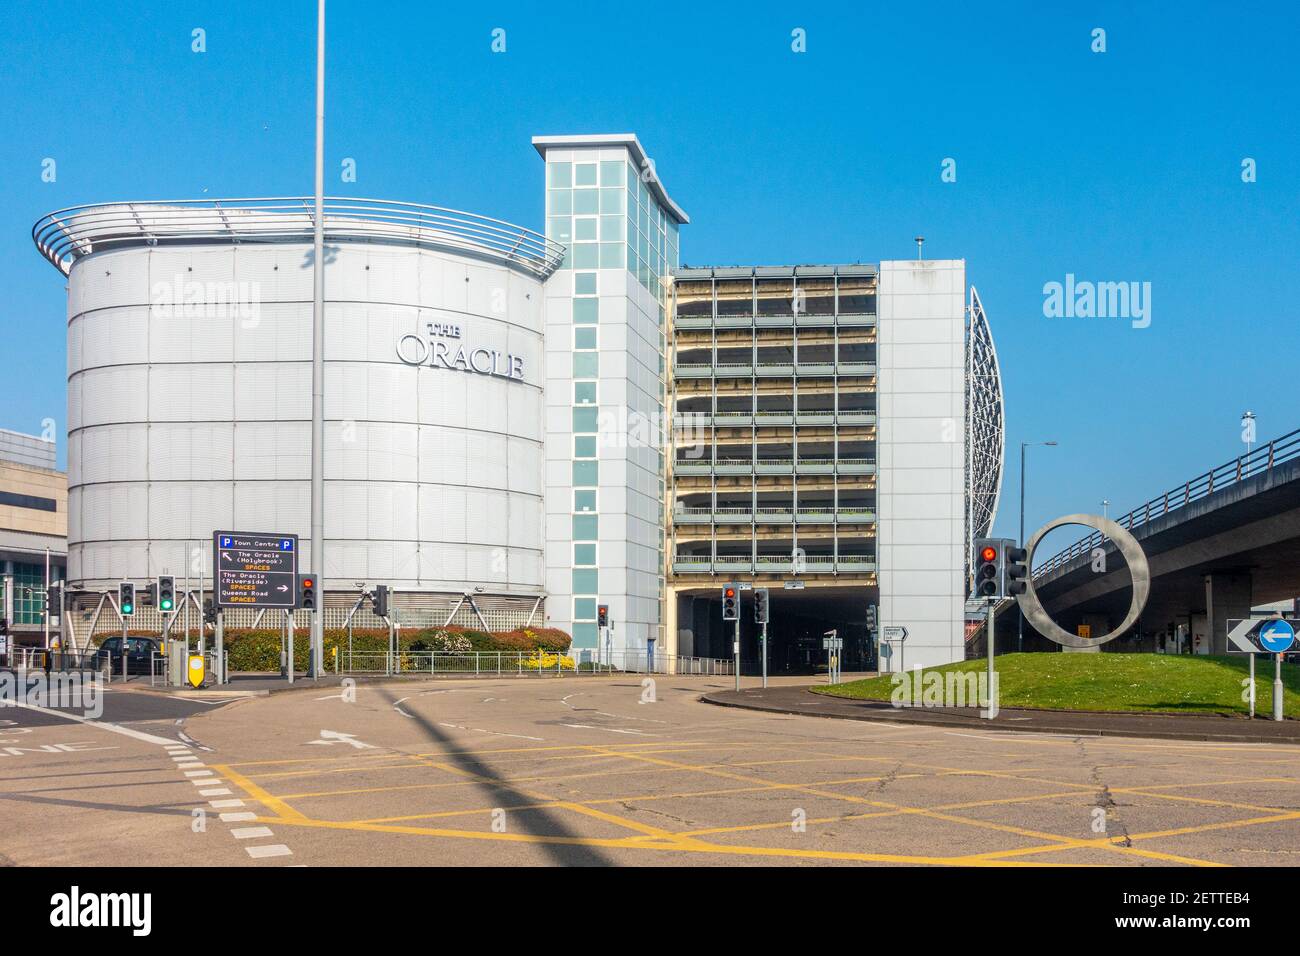 The Oracle shopping centre and multi-storey car park in Reading, UK ...